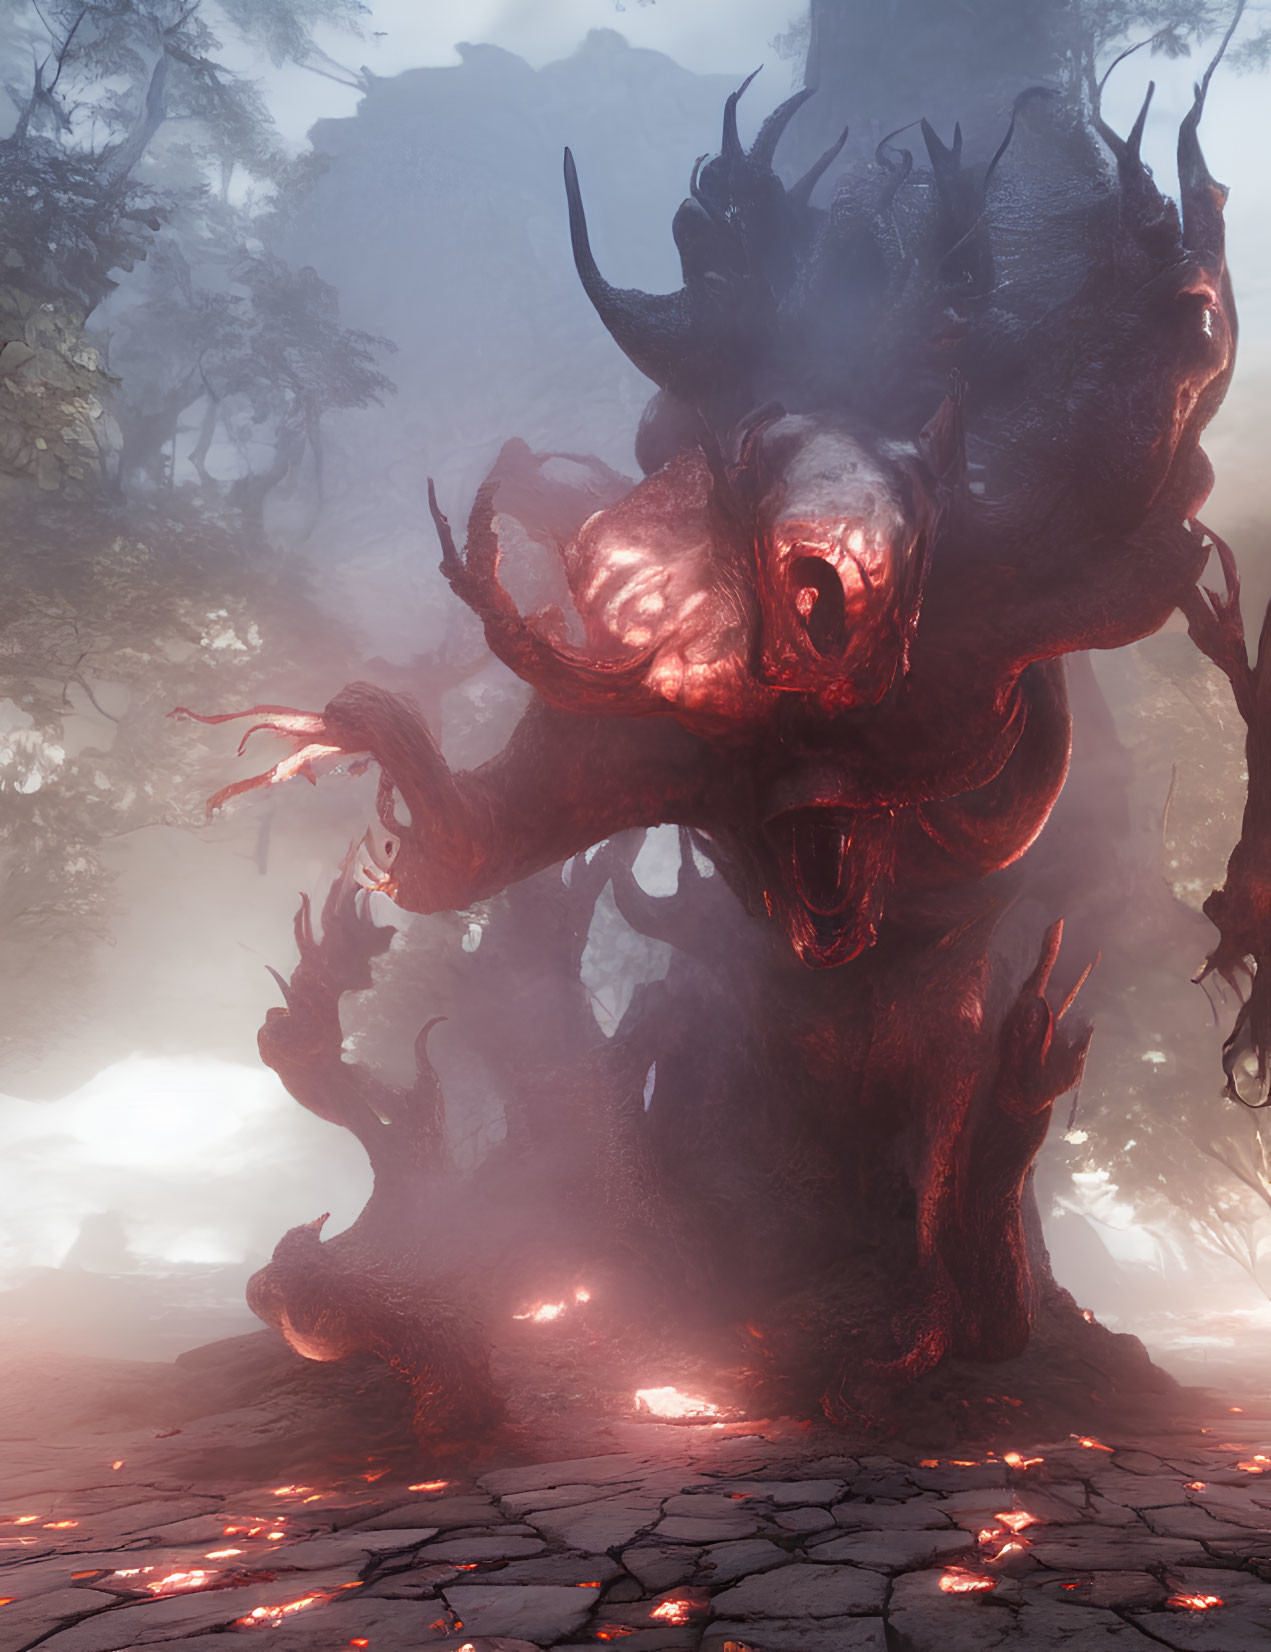 Glowing red-eyed monster in misty, eerie forest